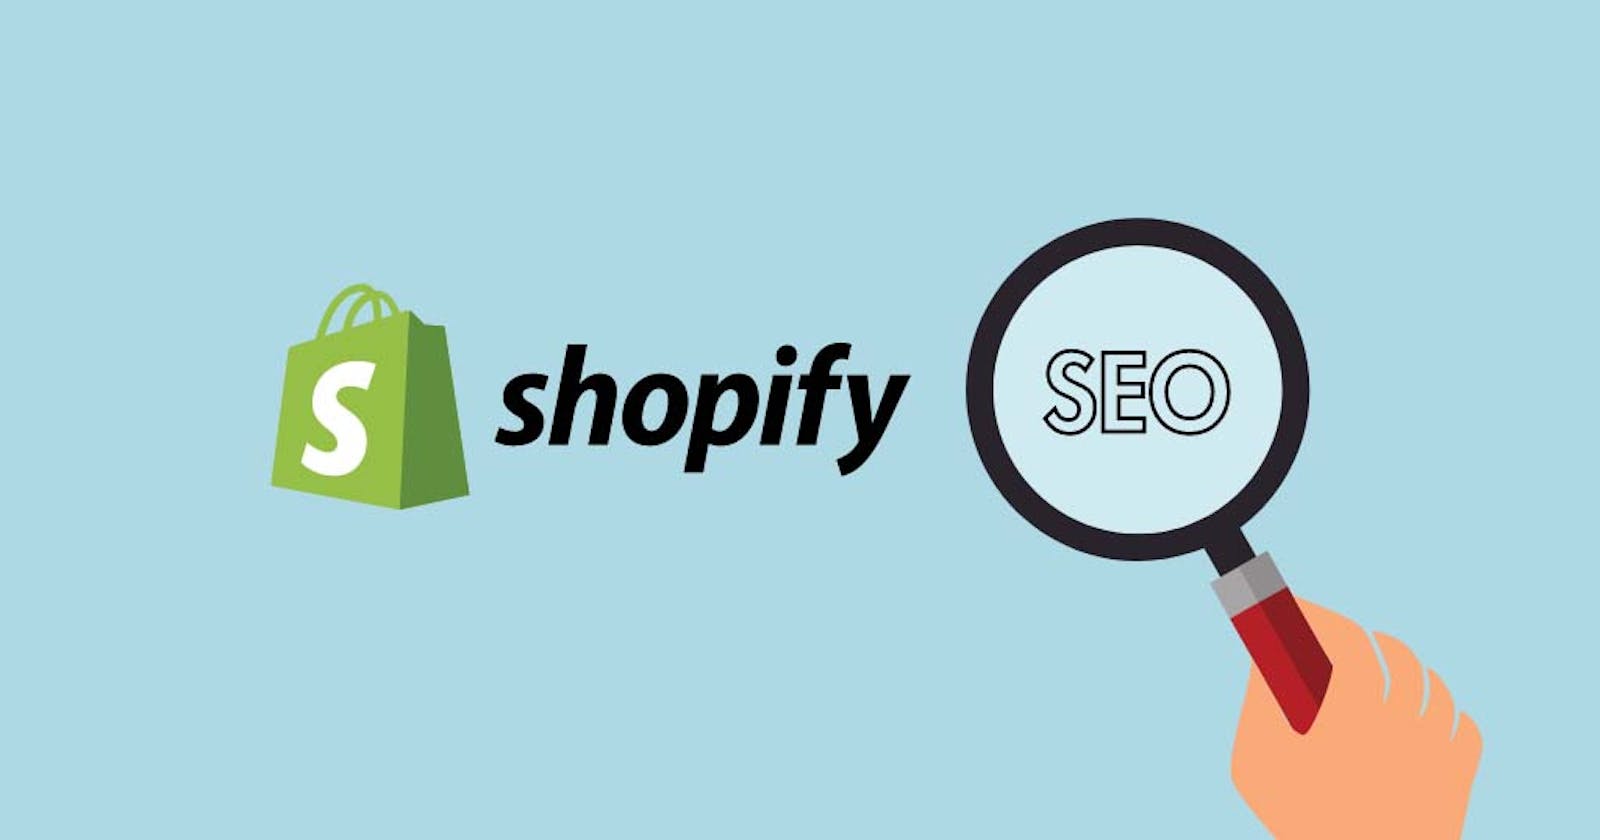 Building an SEO friendly Ecommerce store with Shopify